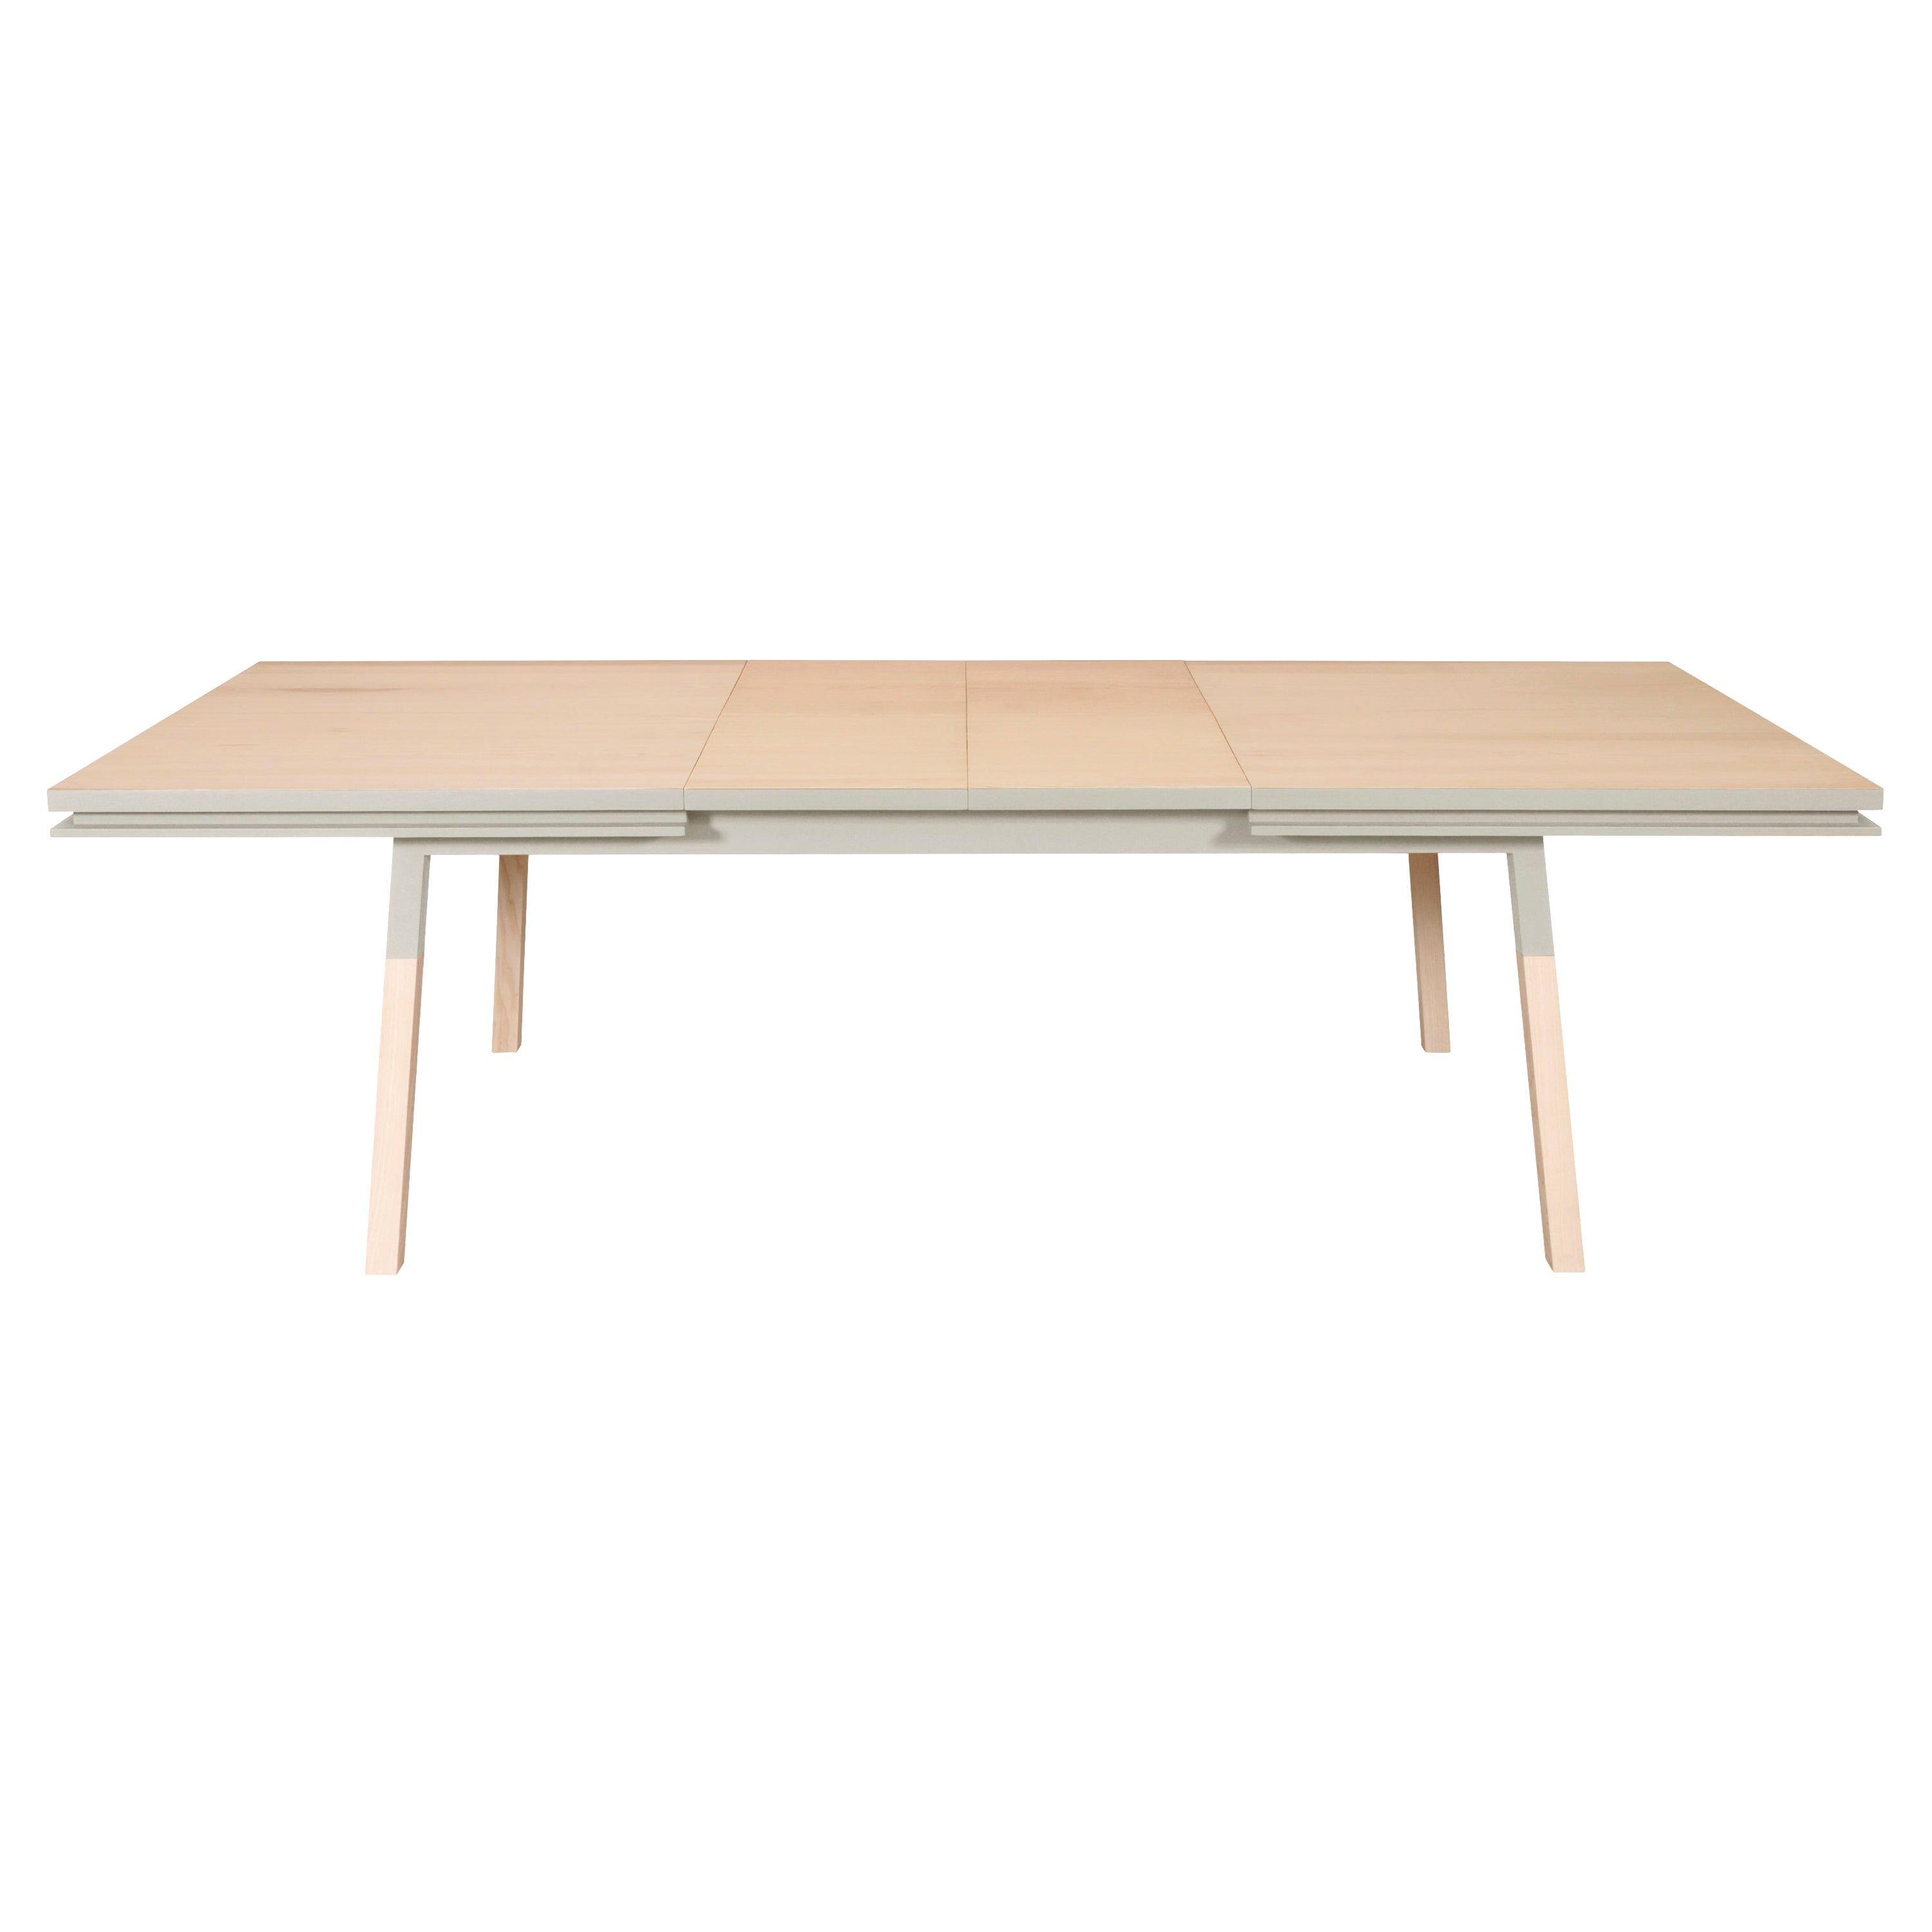 Extensible Dining Table 100% in Solid Wood, Sleek Design by Eric Gizard, Paris 